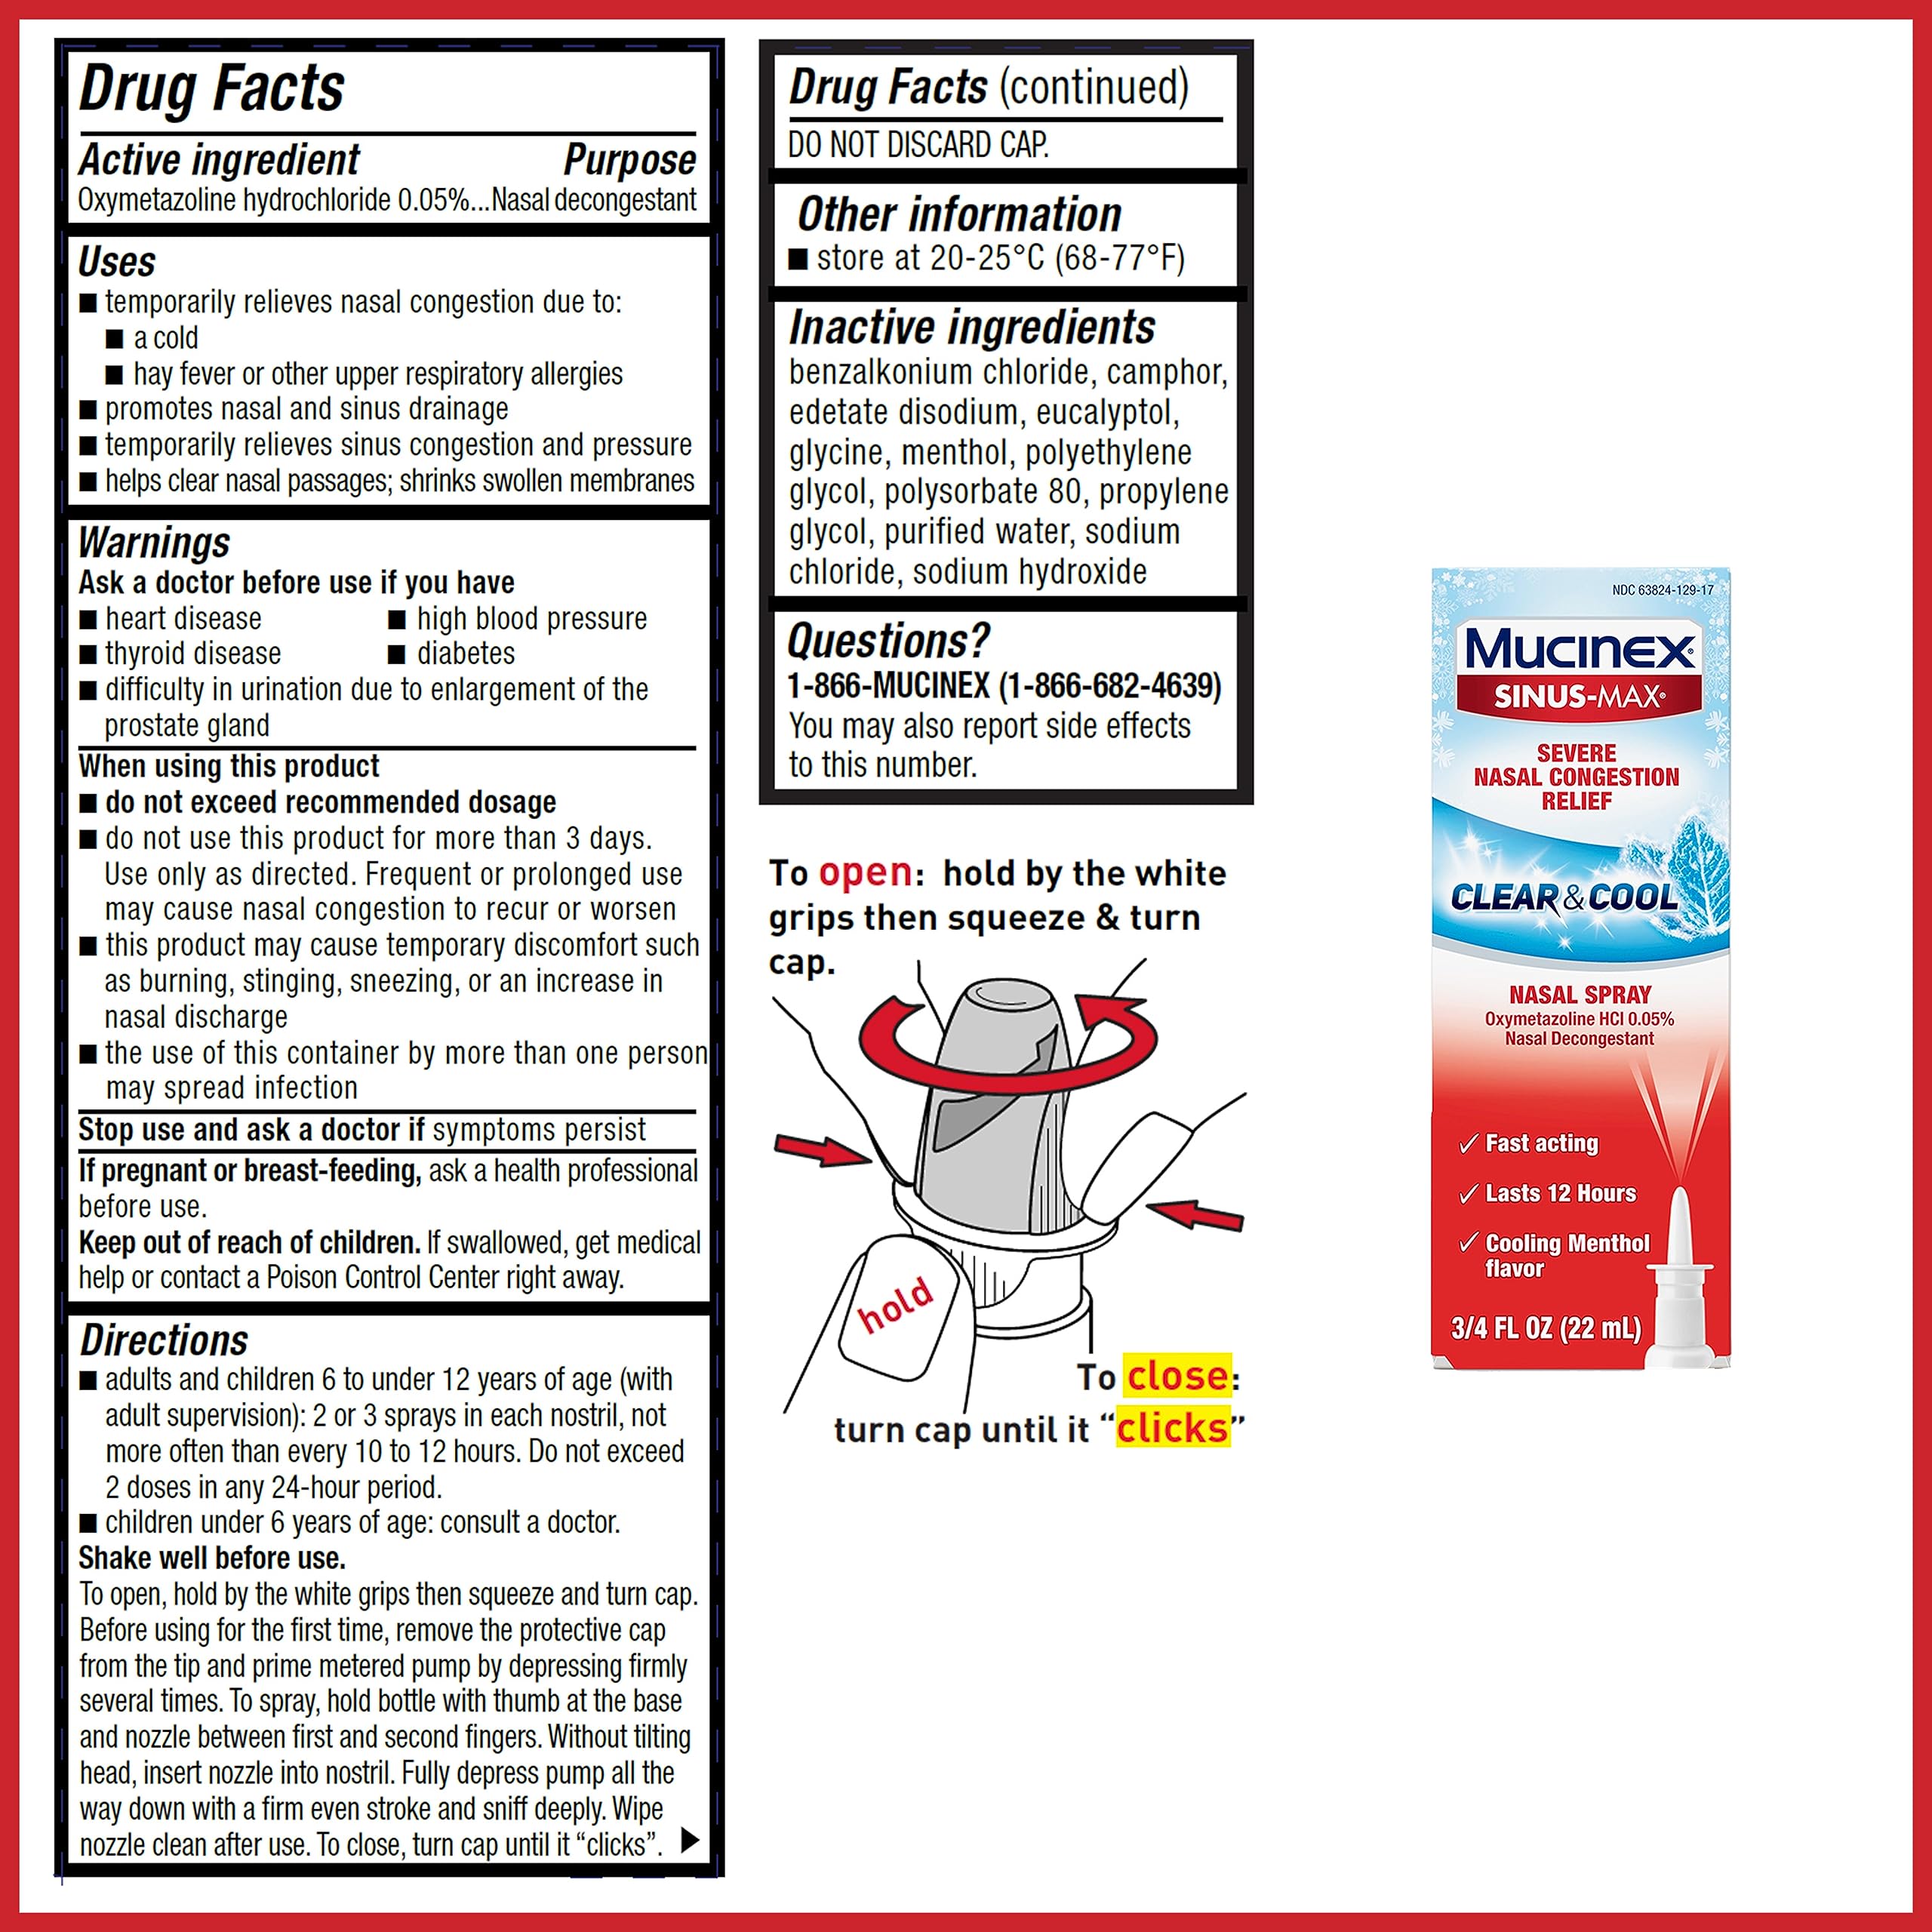 Mucinex Sinus-Max Severe Nasal Congestion Relief Clear & Cool Nasal Spray, 0.75 fl. oz., Lasts 12 Hours, Fast Acting, Cooling Menthol Flavor